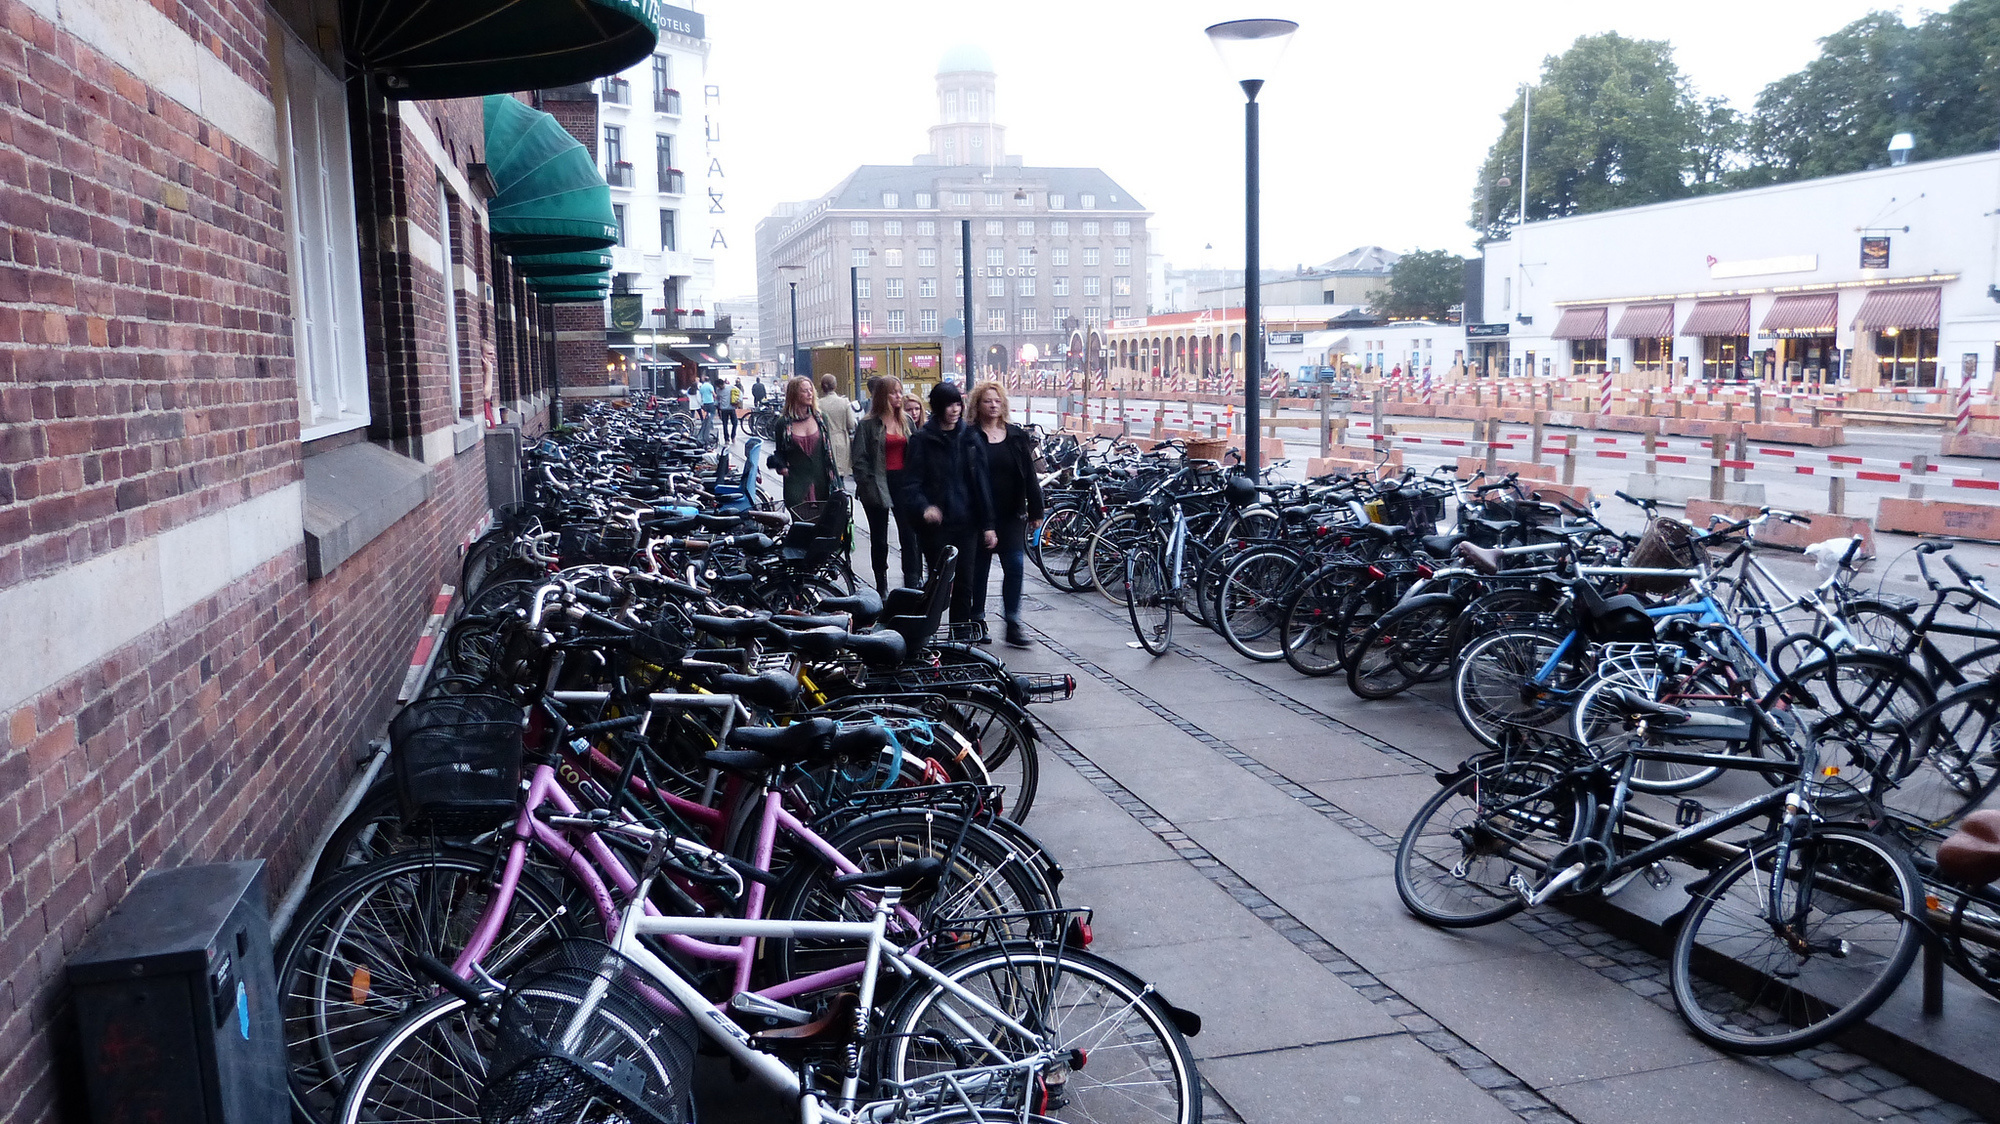 Did you know that there are more bikes in Copenhagen, Denmark than actual people? How exactly does that work?